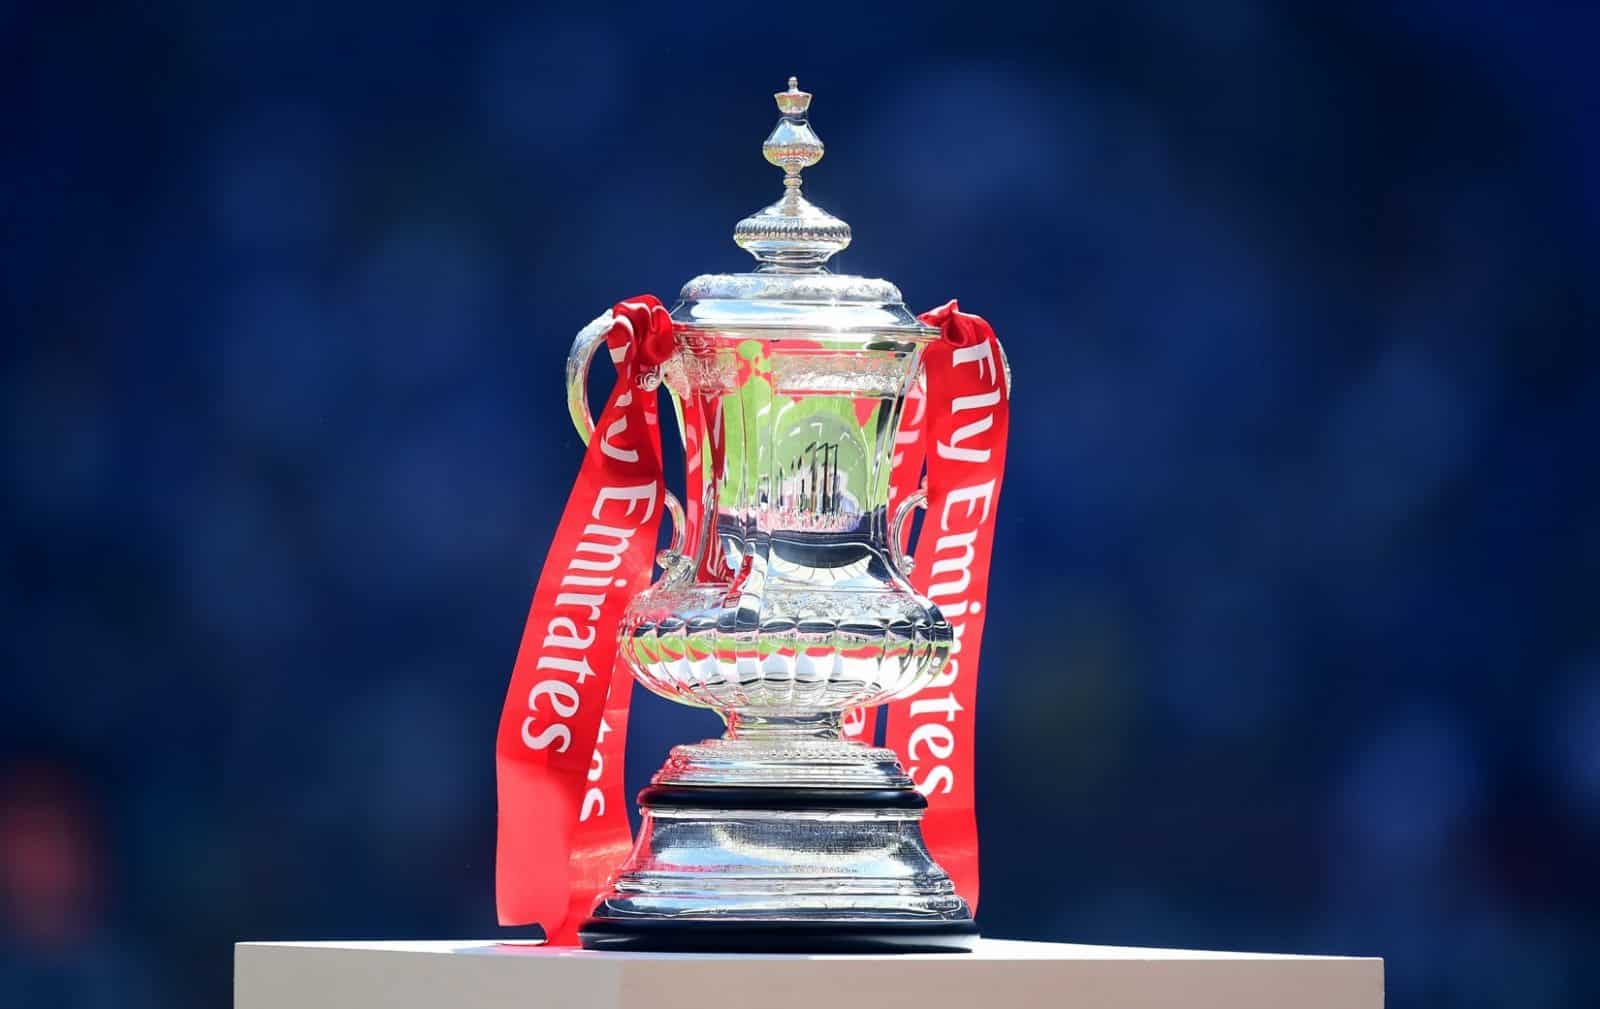 Reduced admission for The Emirates FA Cup tie against Curzon Ashton ...